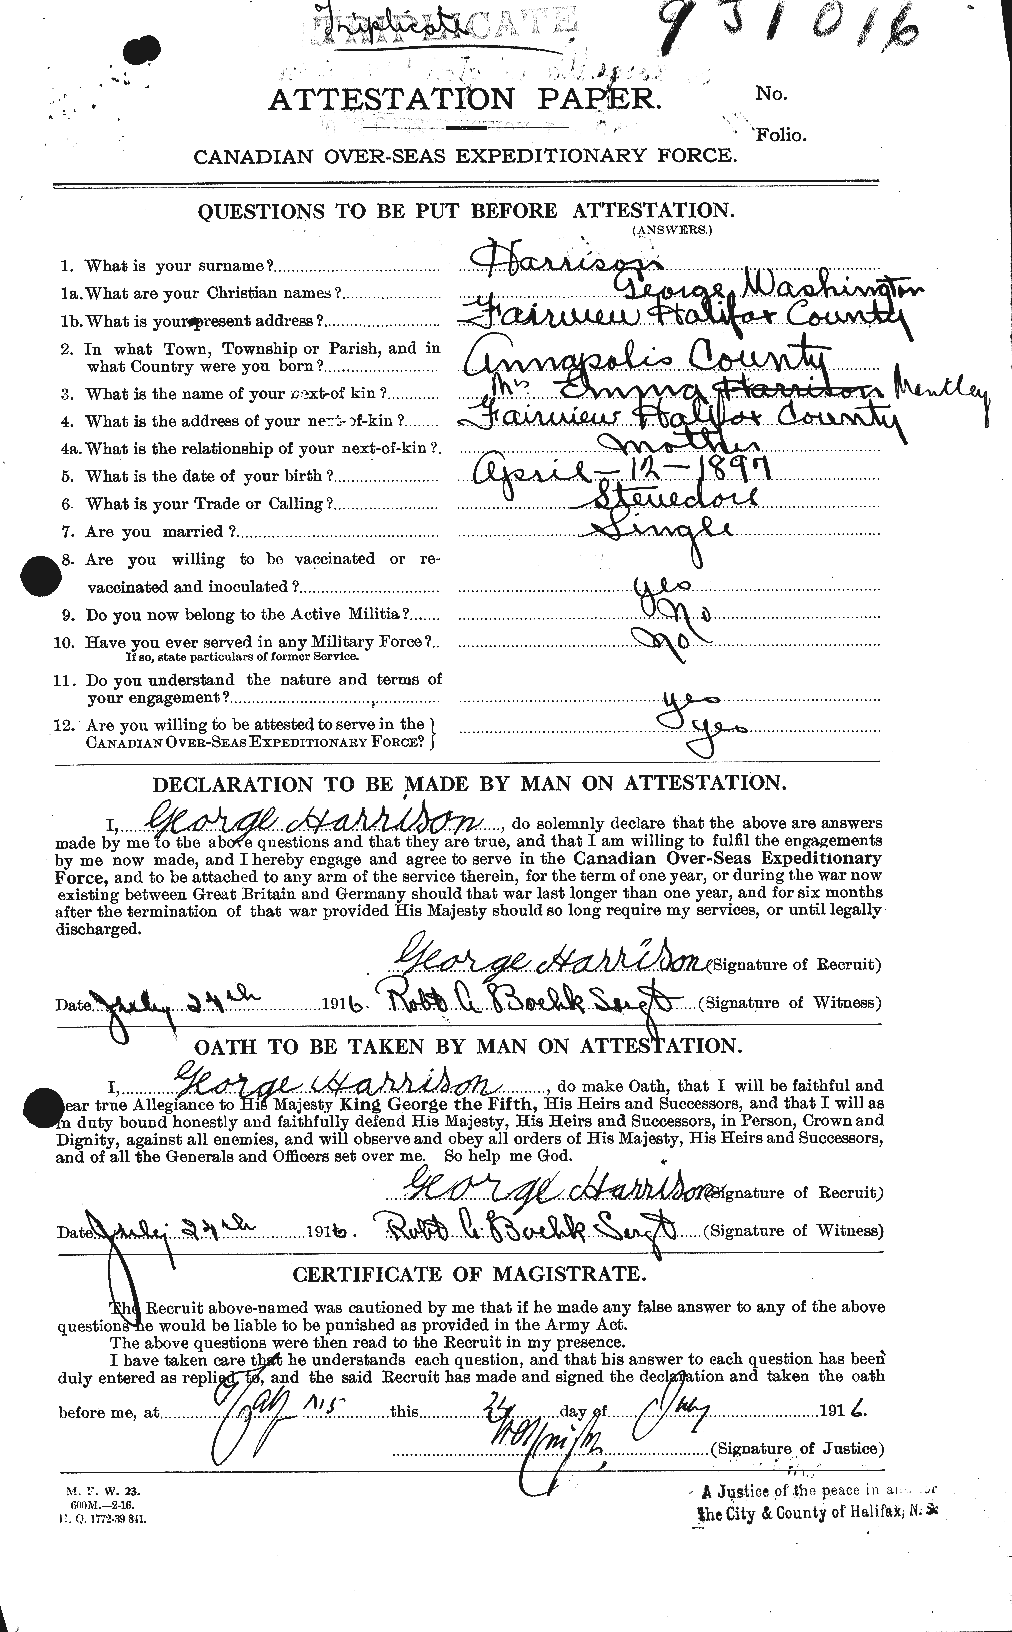 Personnel Records of the First World War - CEF 380461a